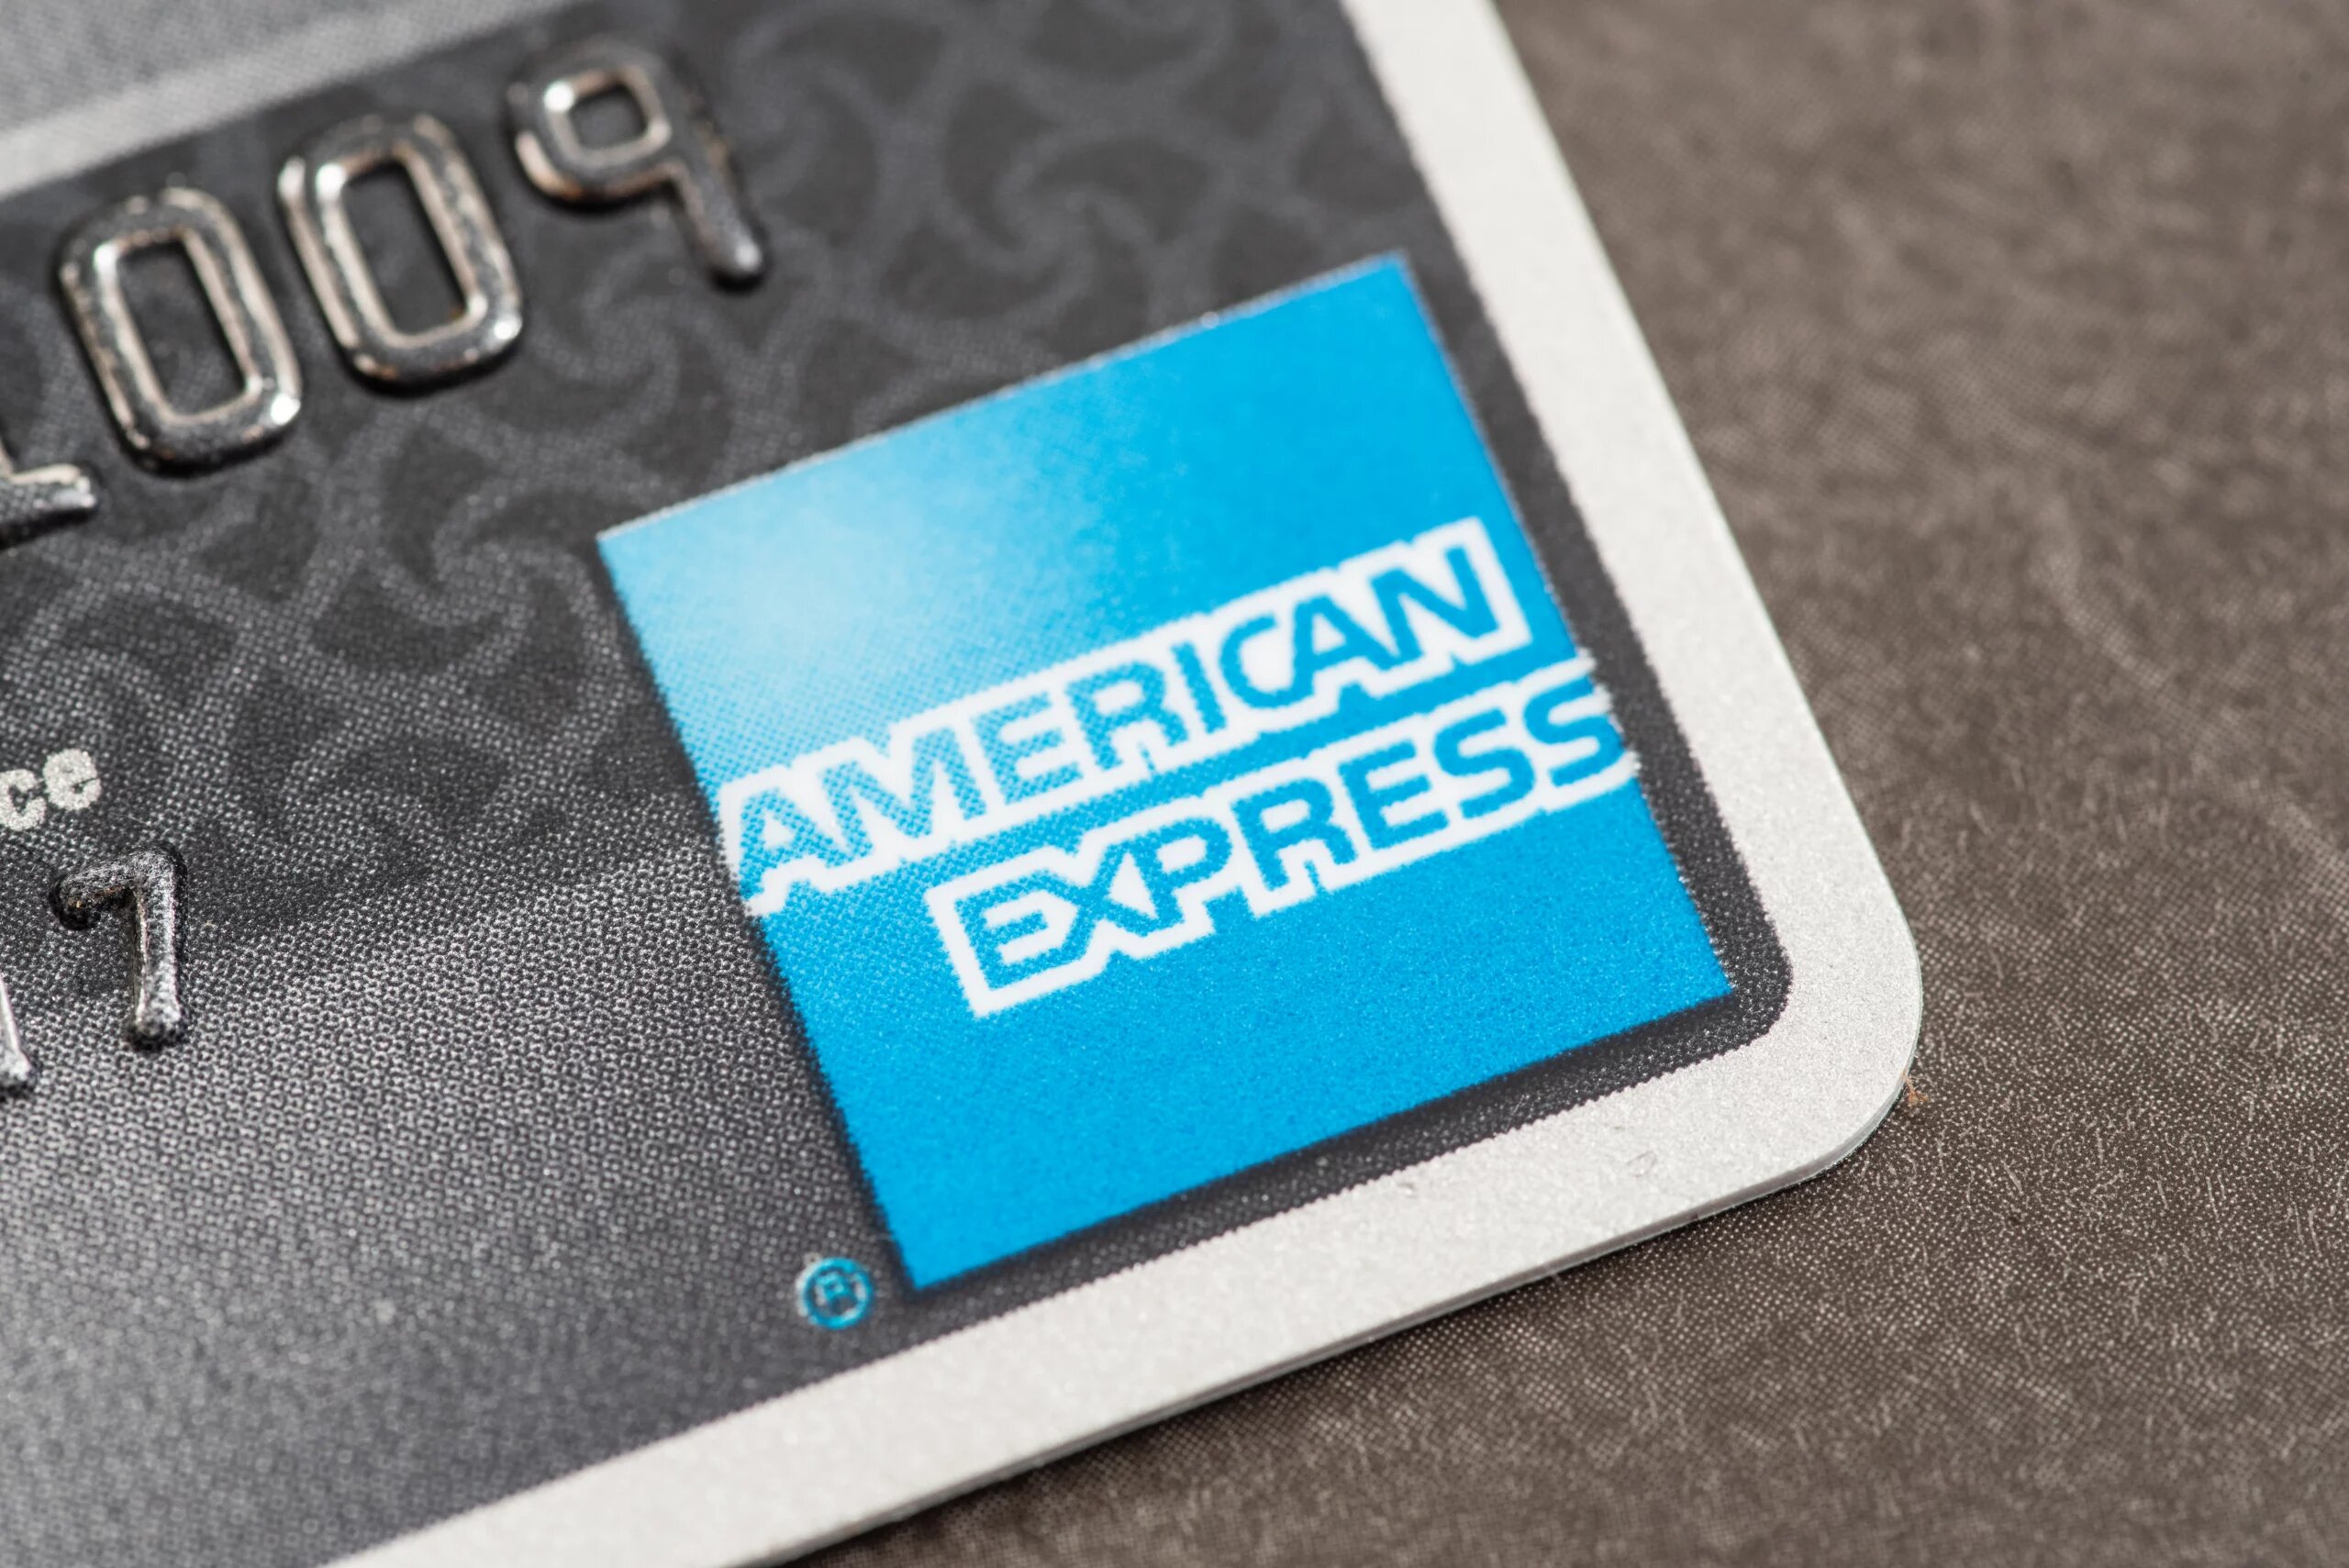 American Express credit card zoomed on logo